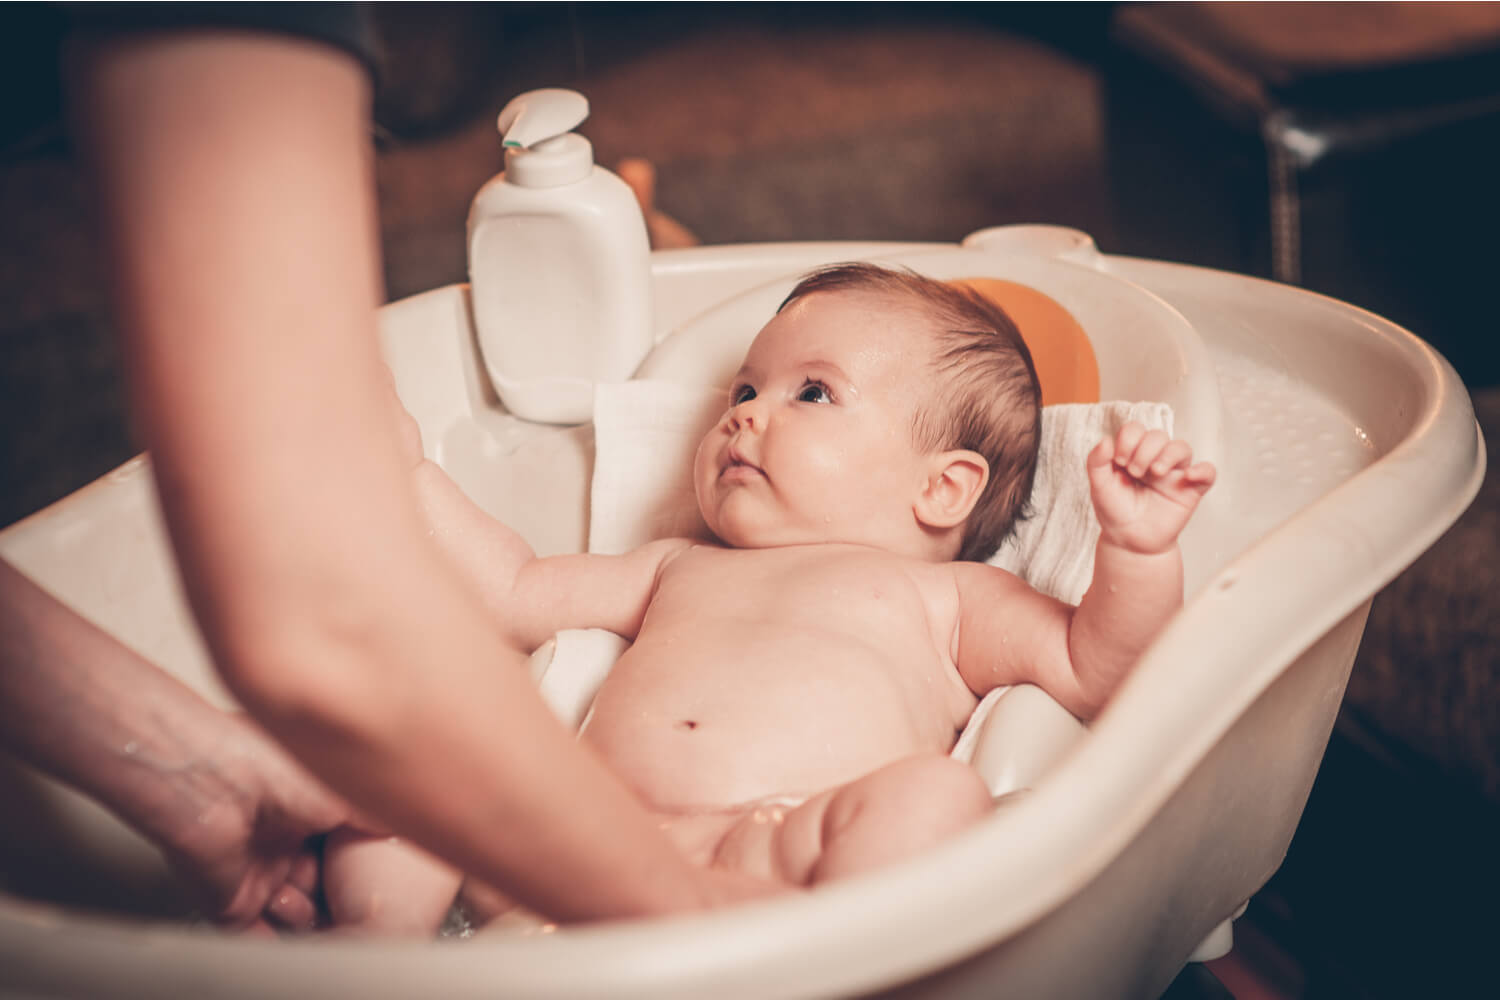 Baby Bath - Some Common Mistakes